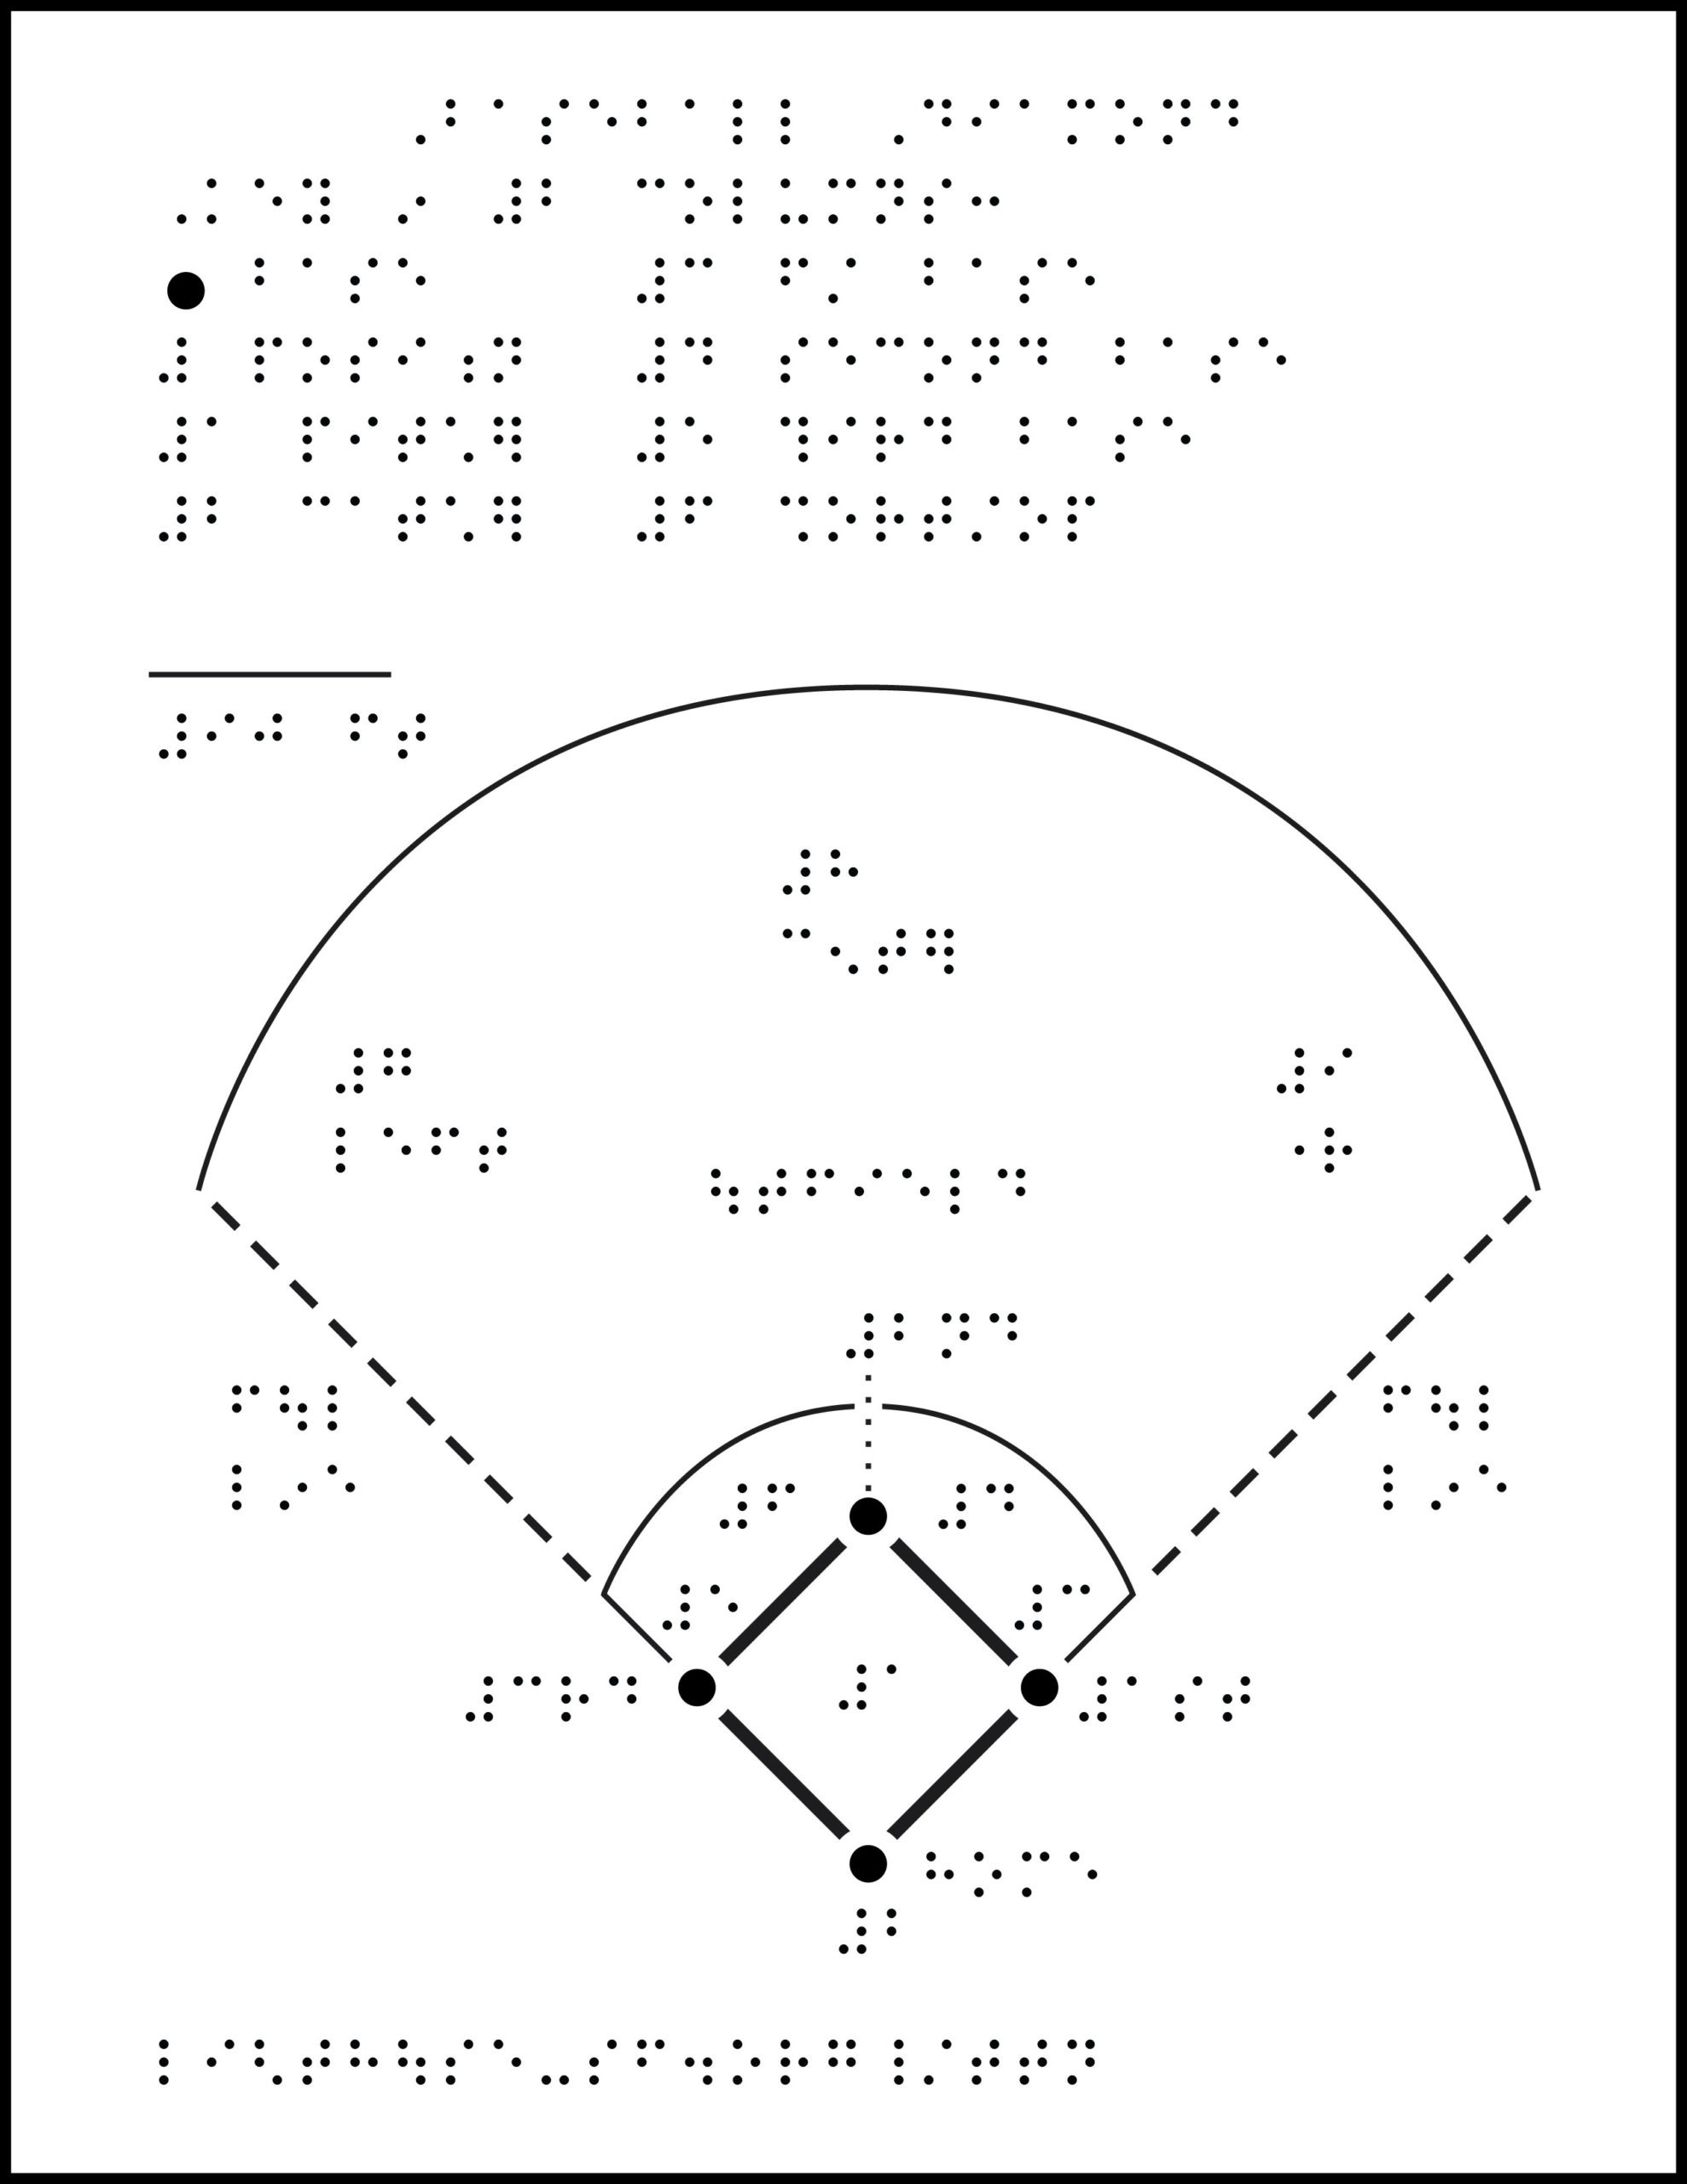 What is the layout of a major league baseball field